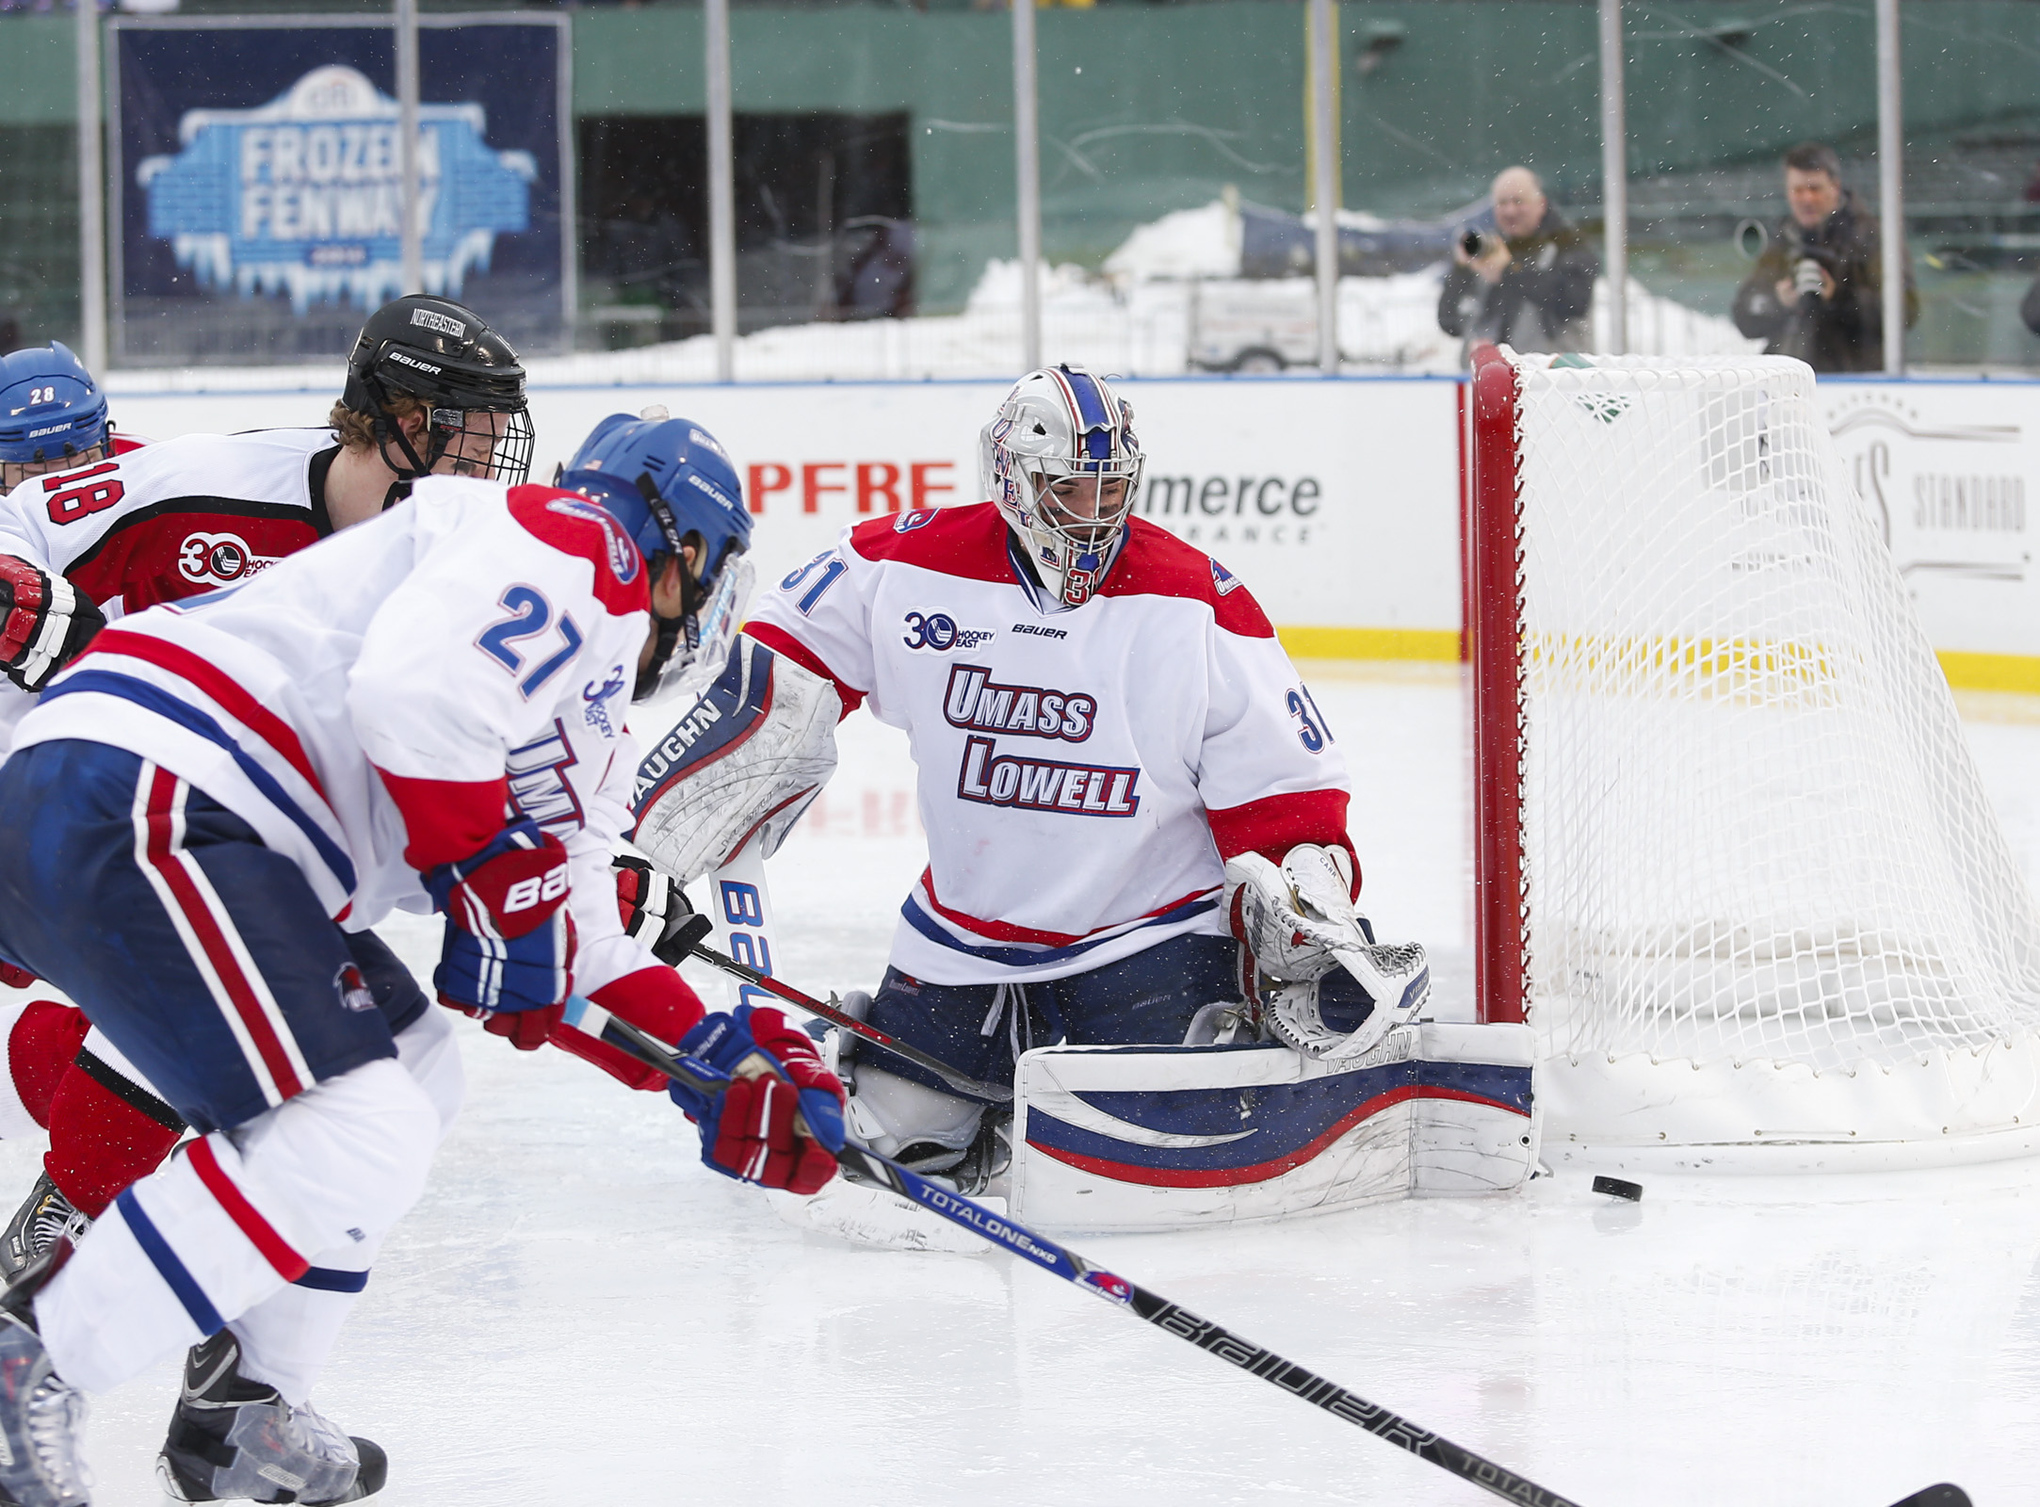 Jeff Smith is the likely heir apparent in net for UMass Lowell.